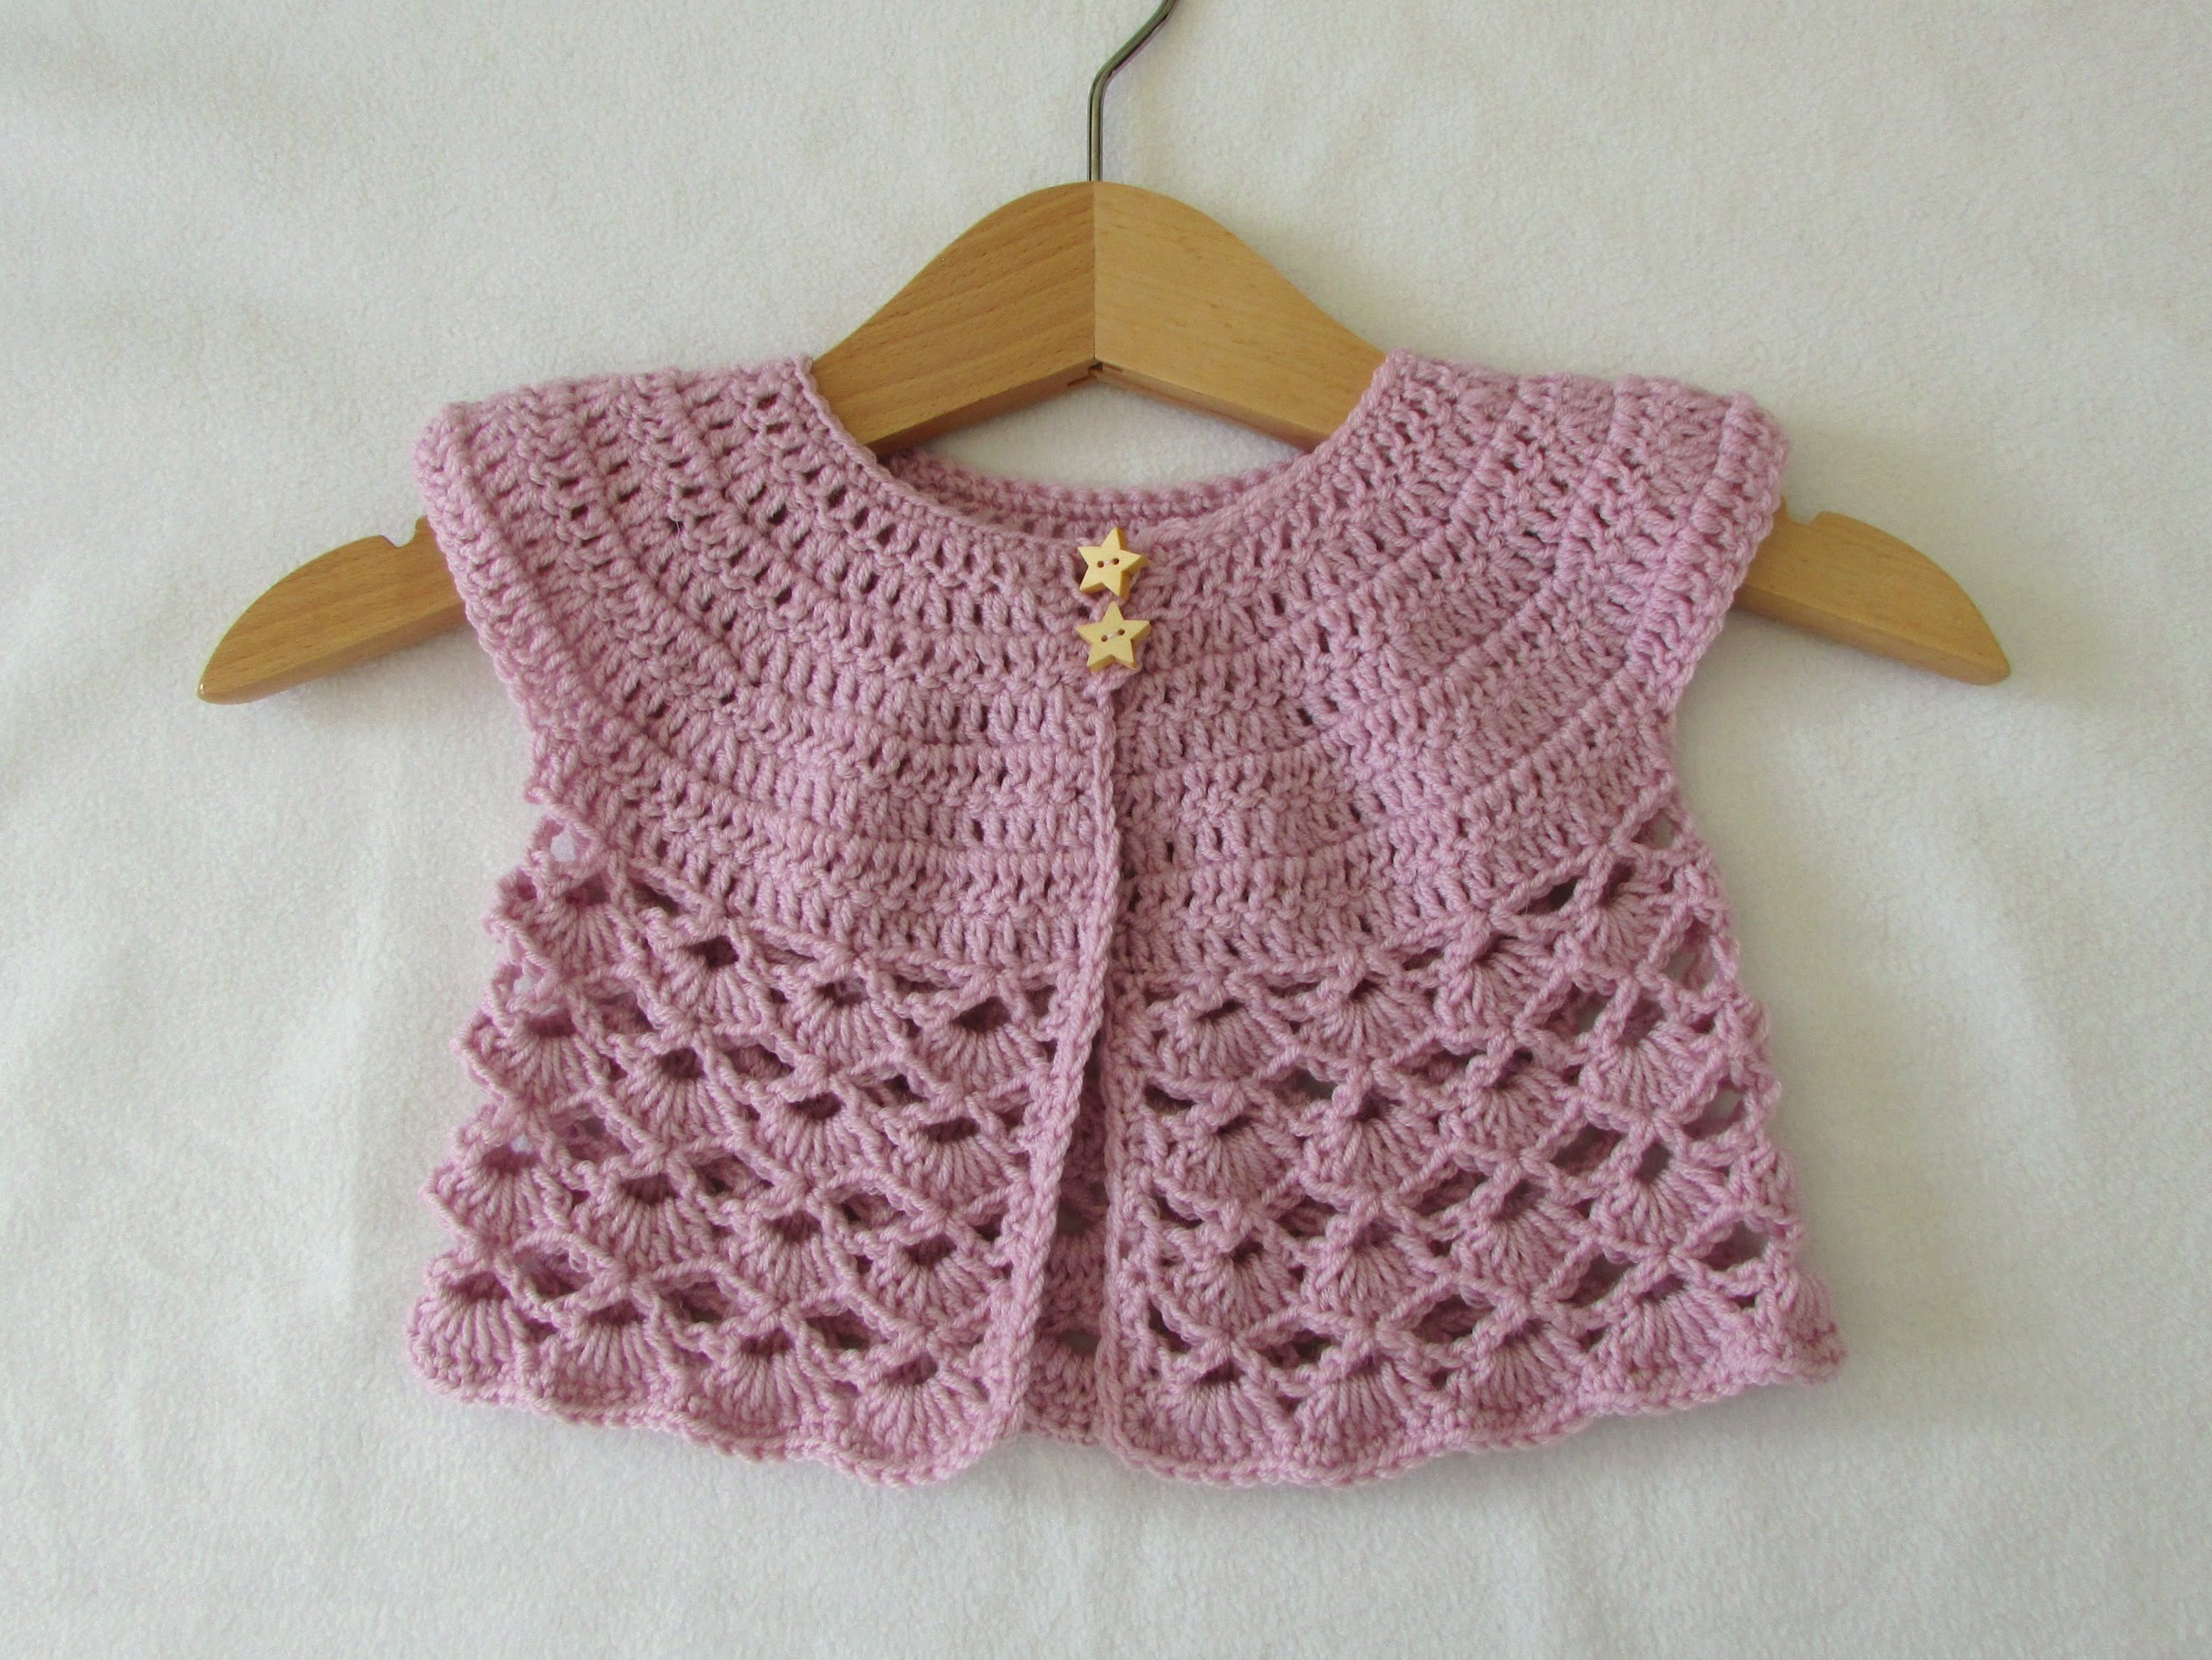 Crochet Baby Sweater Patterns How To Crochet Ba Sweater Crochet And Knitting Patterns 2019